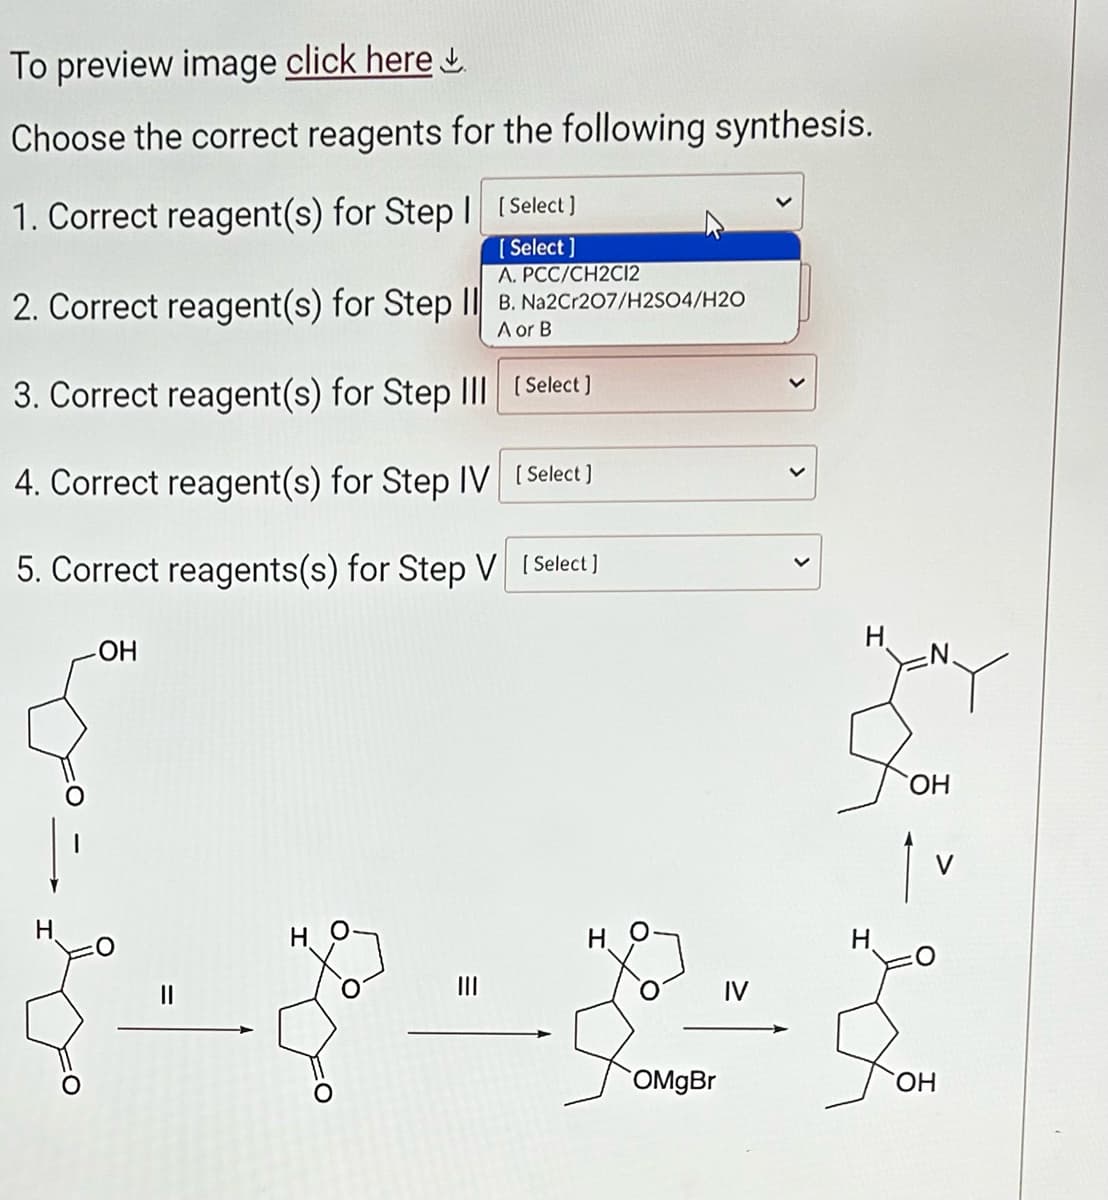 To preview image click here
Choose the correct reagents for the following synthesis.
1. Correct reagent(s) for Step I [Select]
[Select]
A. PCC/CH2C12
2. Correct reagent(s) for Step II B. Na2Cr207/H2SO4/H20
A or B
3. Correct reagent(s) for Step III
[Select]
4. Correct reagent(s) for Step IV [Select]
5. Correct reagents(s) for Step V [Select]
H
-OH
11
|||
OMgBr
H
H
OH
OH